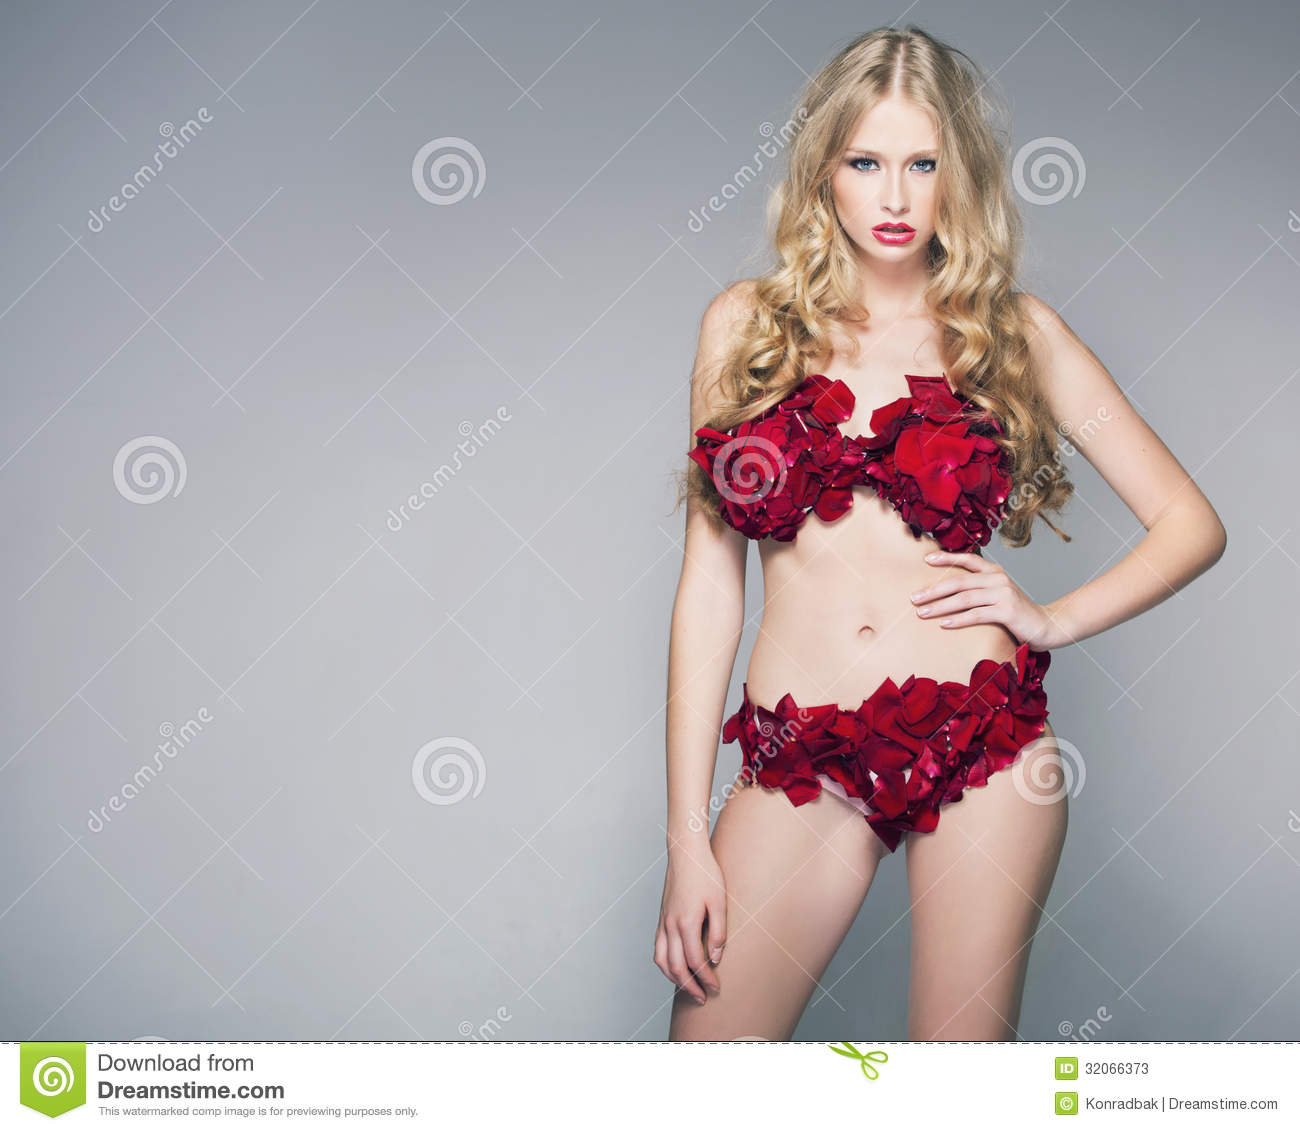 Blonde Pretty Woman With Serious Look Stock Photos   Image  32066373